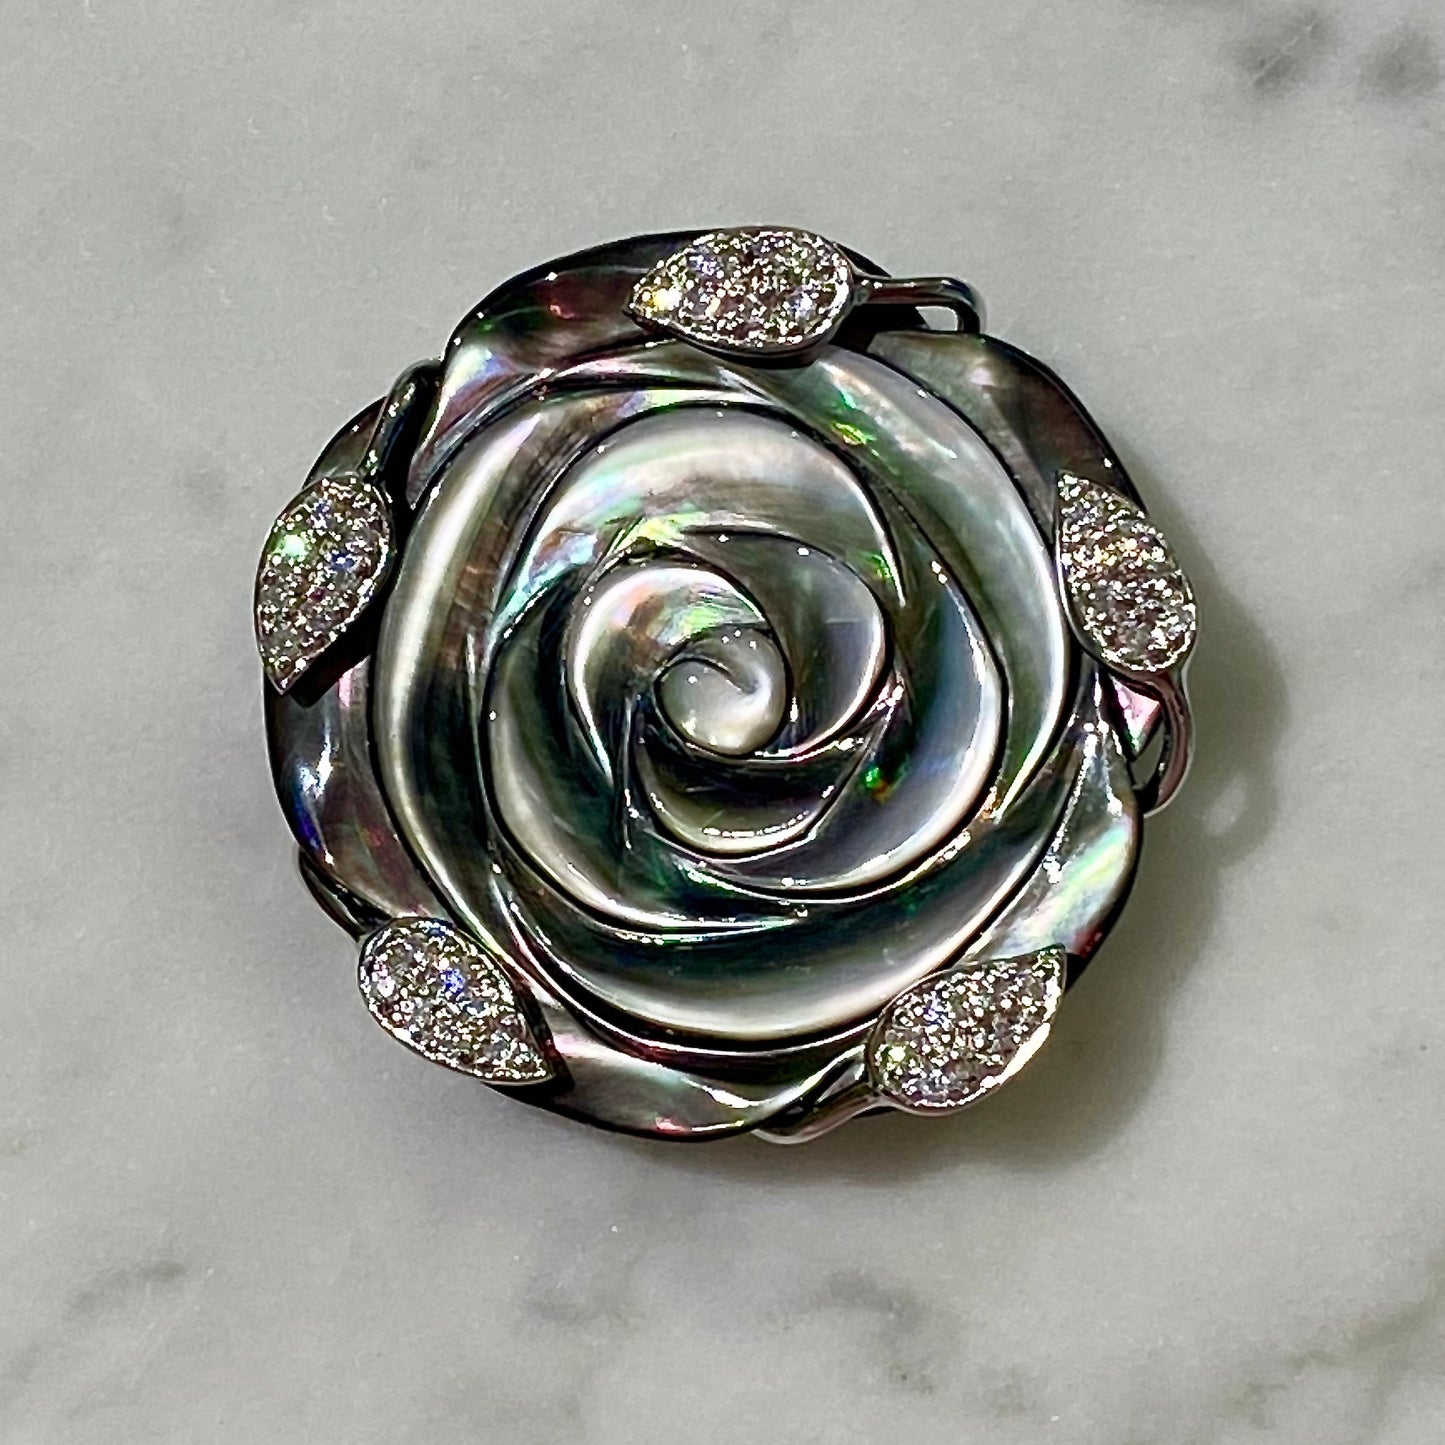 Natural Black Mother of Pearl Blooming Rose Pendant/Brooch with CZ-studded Leaves in Rhodium-Plated Sterling Silver (18" twisted black satin necklace cord included).